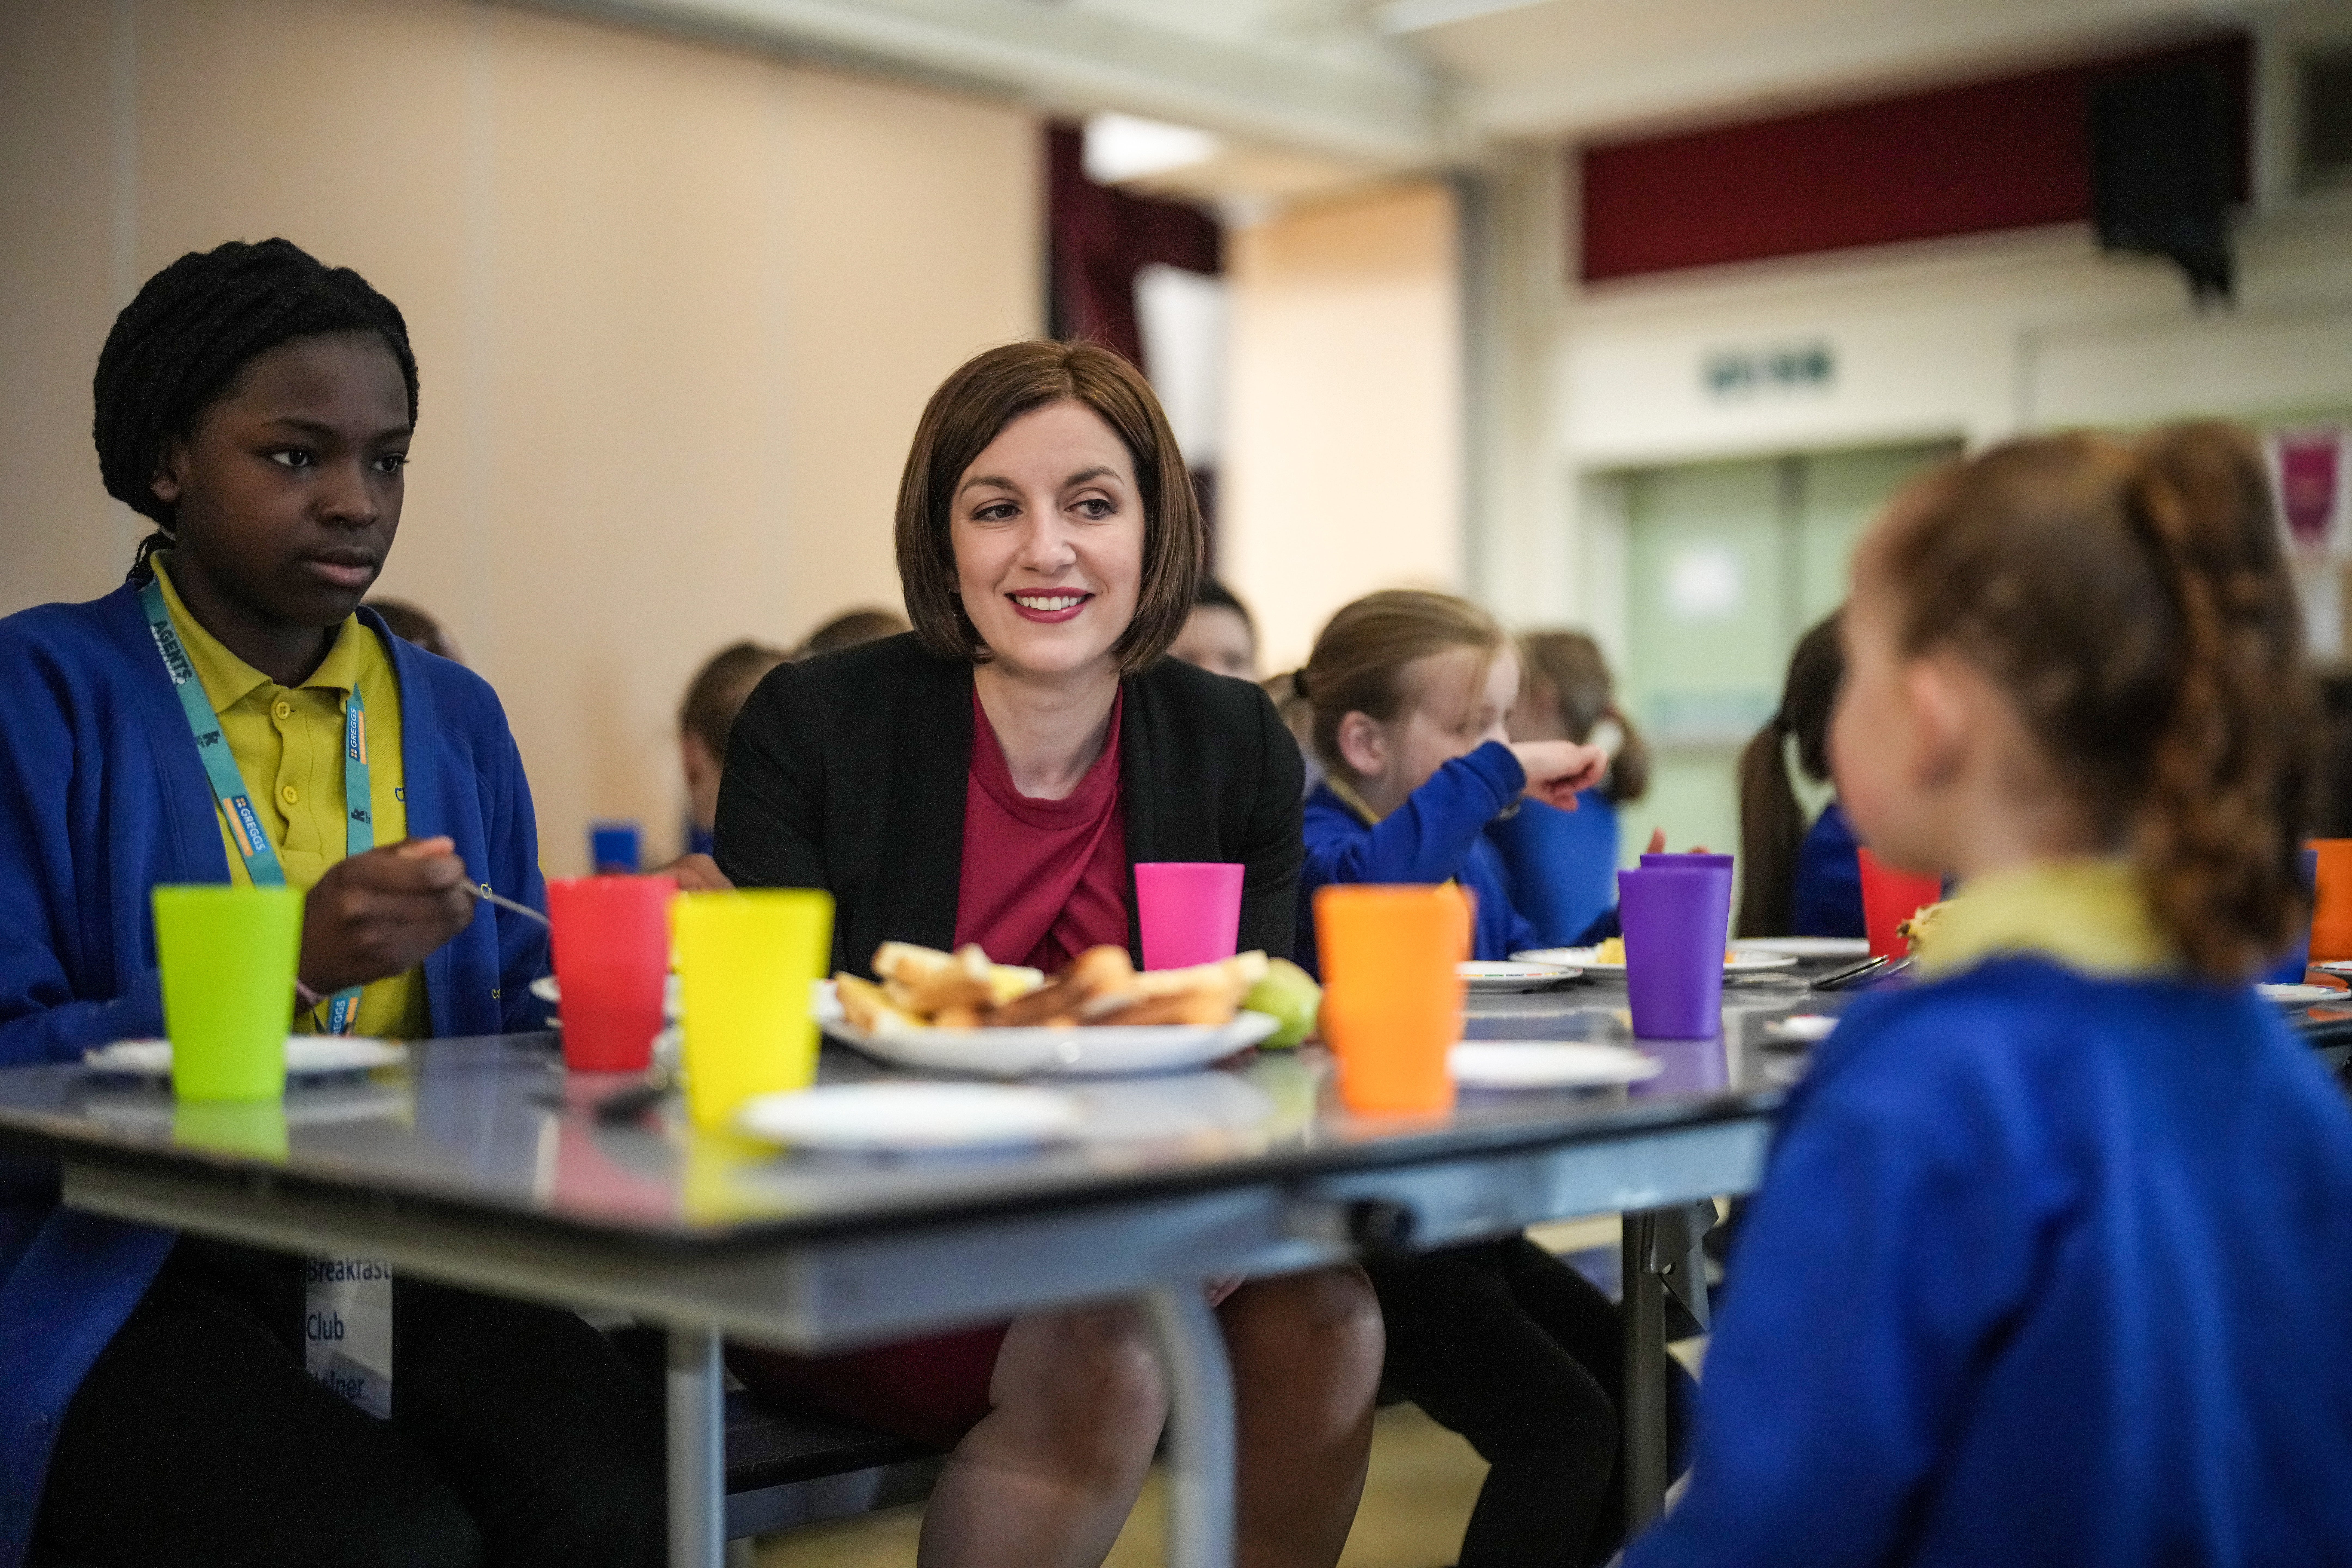 Bridget Phillipson: ‘If I become education secretary, childcare will be my number one priority’